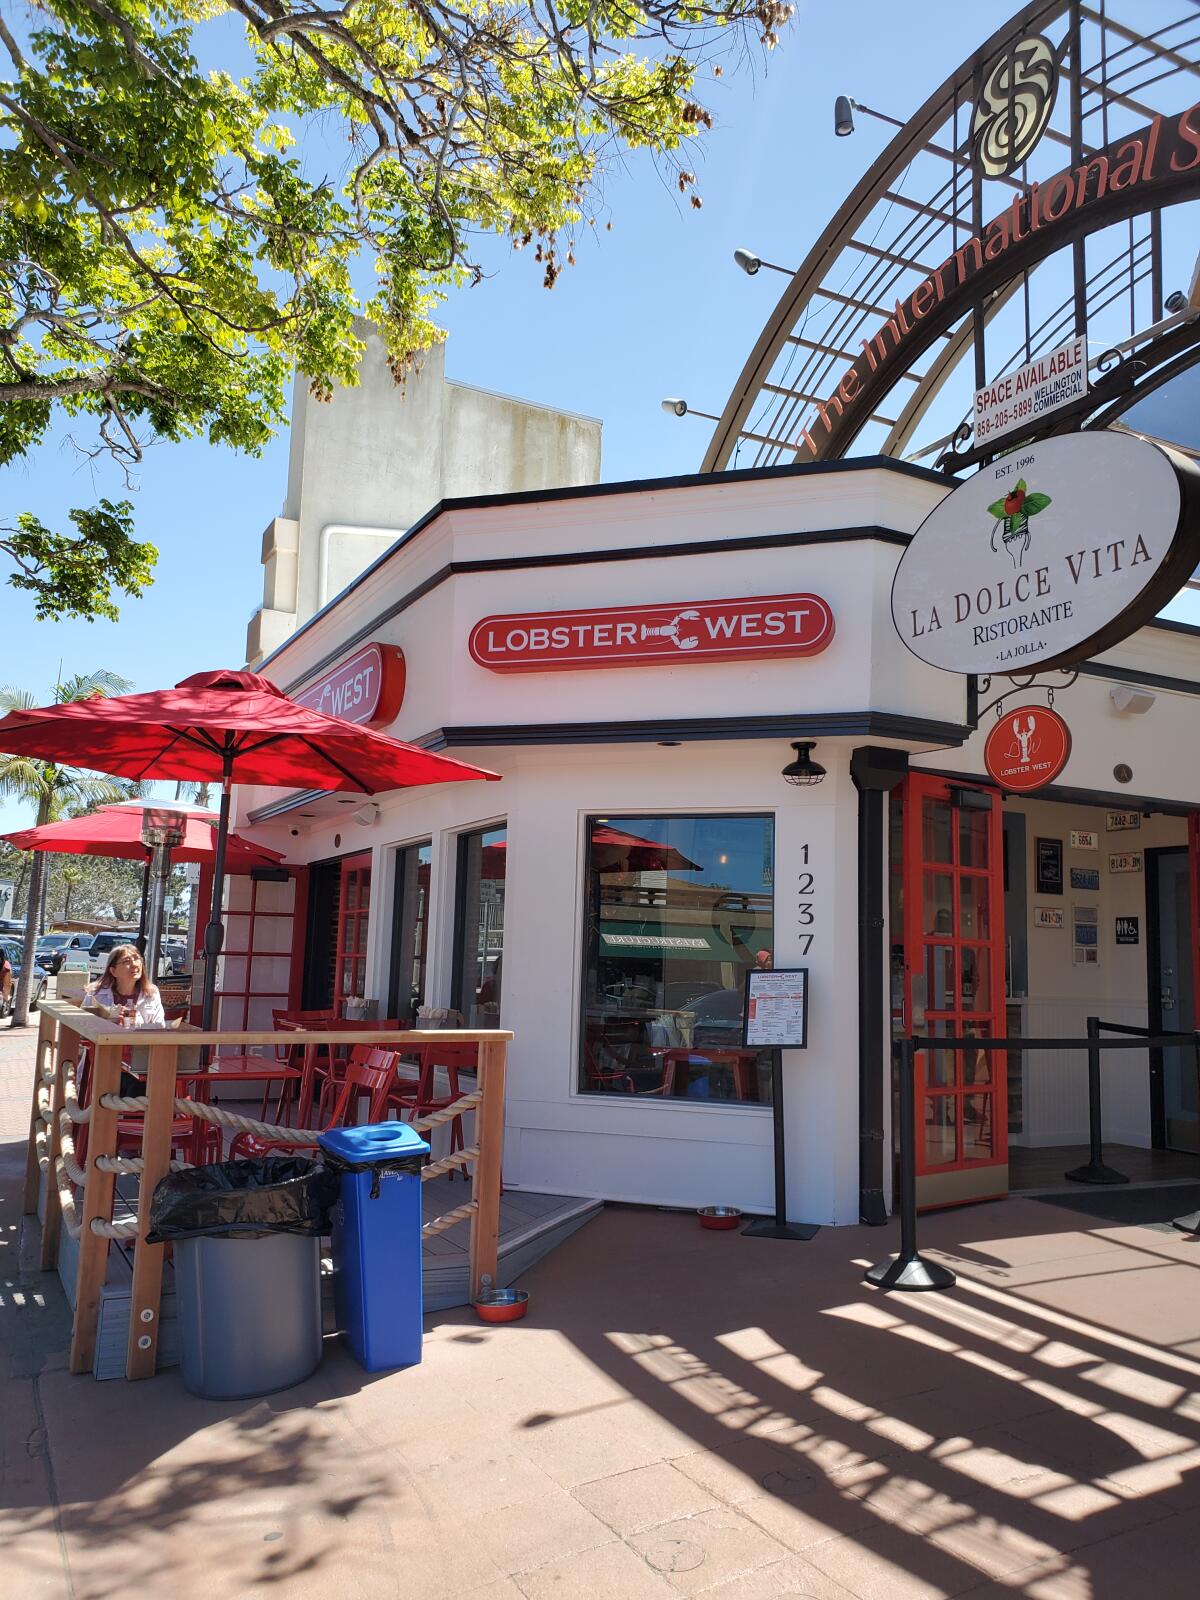 Lobster West in La Jolla will be among the participating restaurants on the Famished app when it rolls out locally.